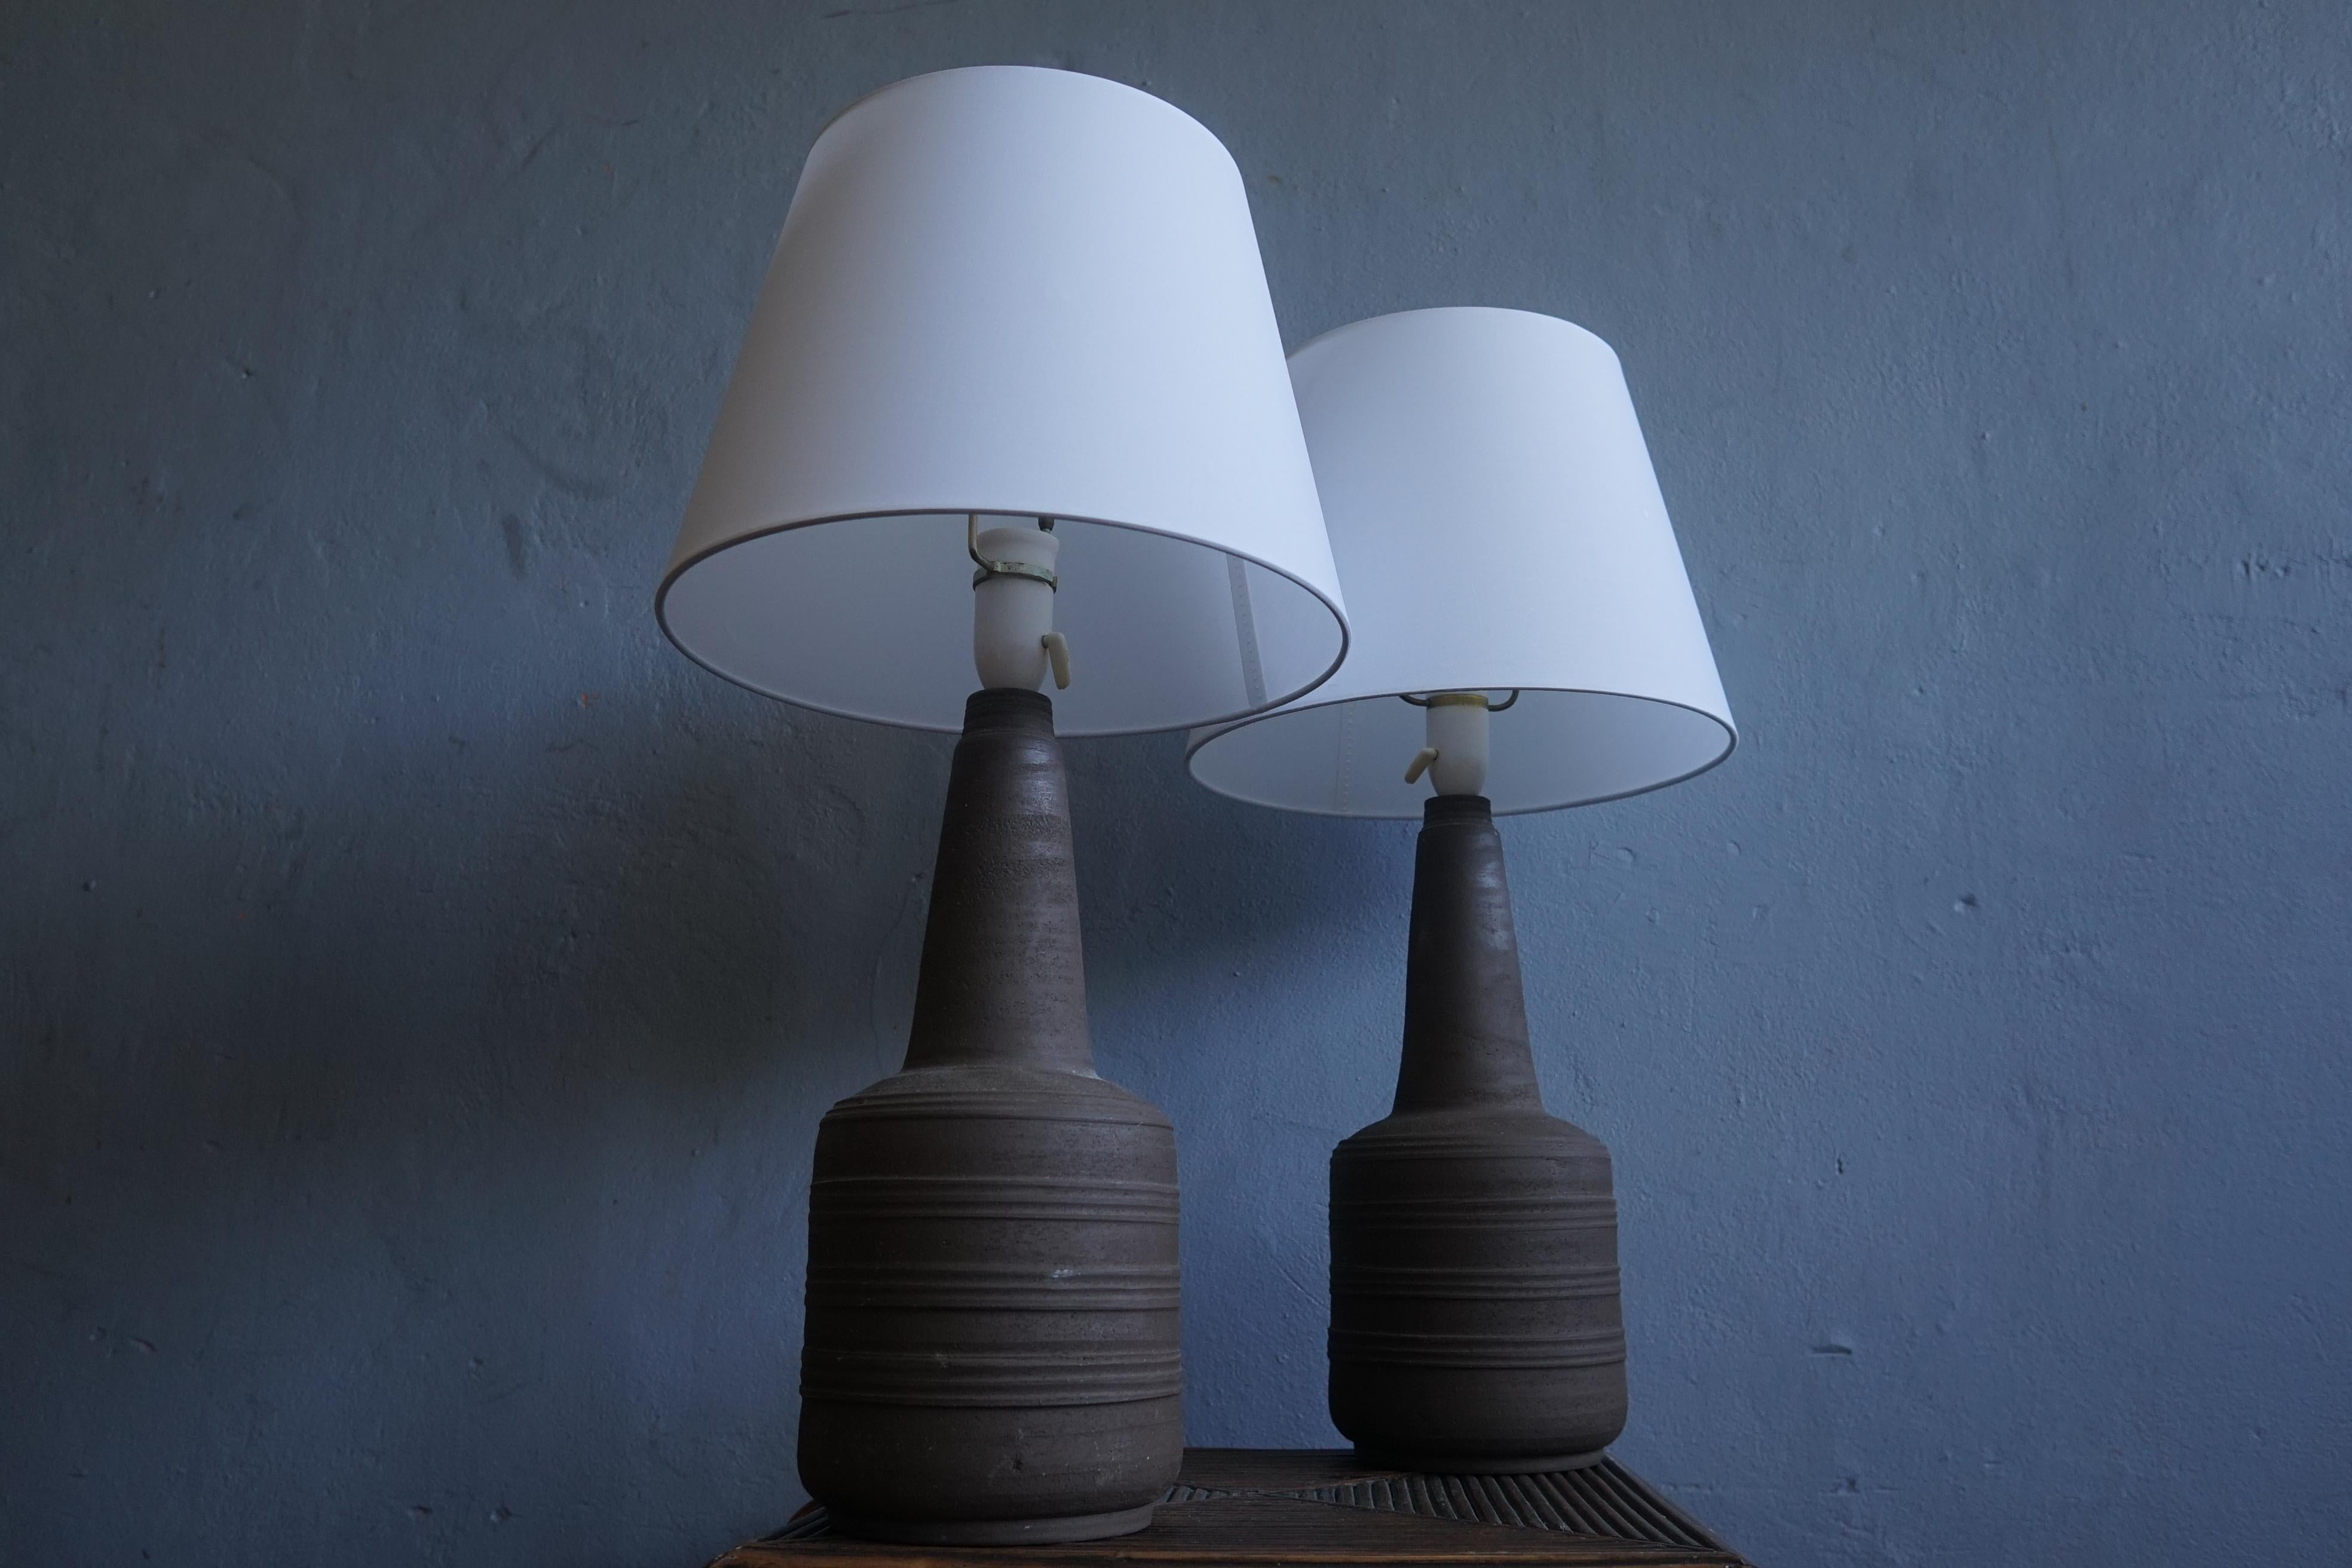 Pair of tall unglazed ceramic Brutalist lamps manufactured in the 1970s by a unknown Danish manufacturer 


Brutalist architecture is an architectural style that emerged during the 1950s in the United Kingdom, among the reconstruction projects of